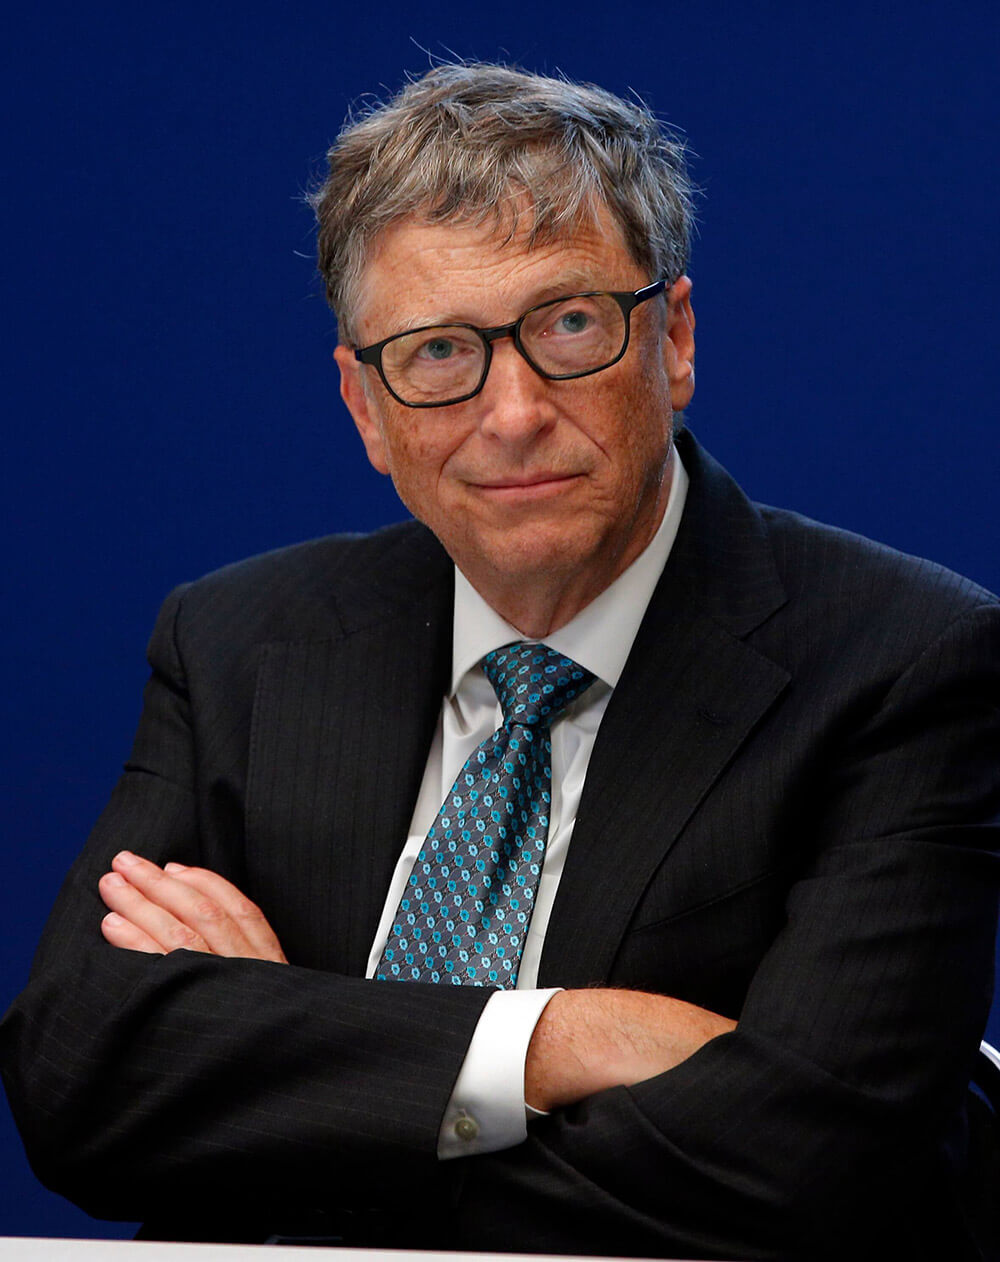 picture of Bill Gates, the richest man in America